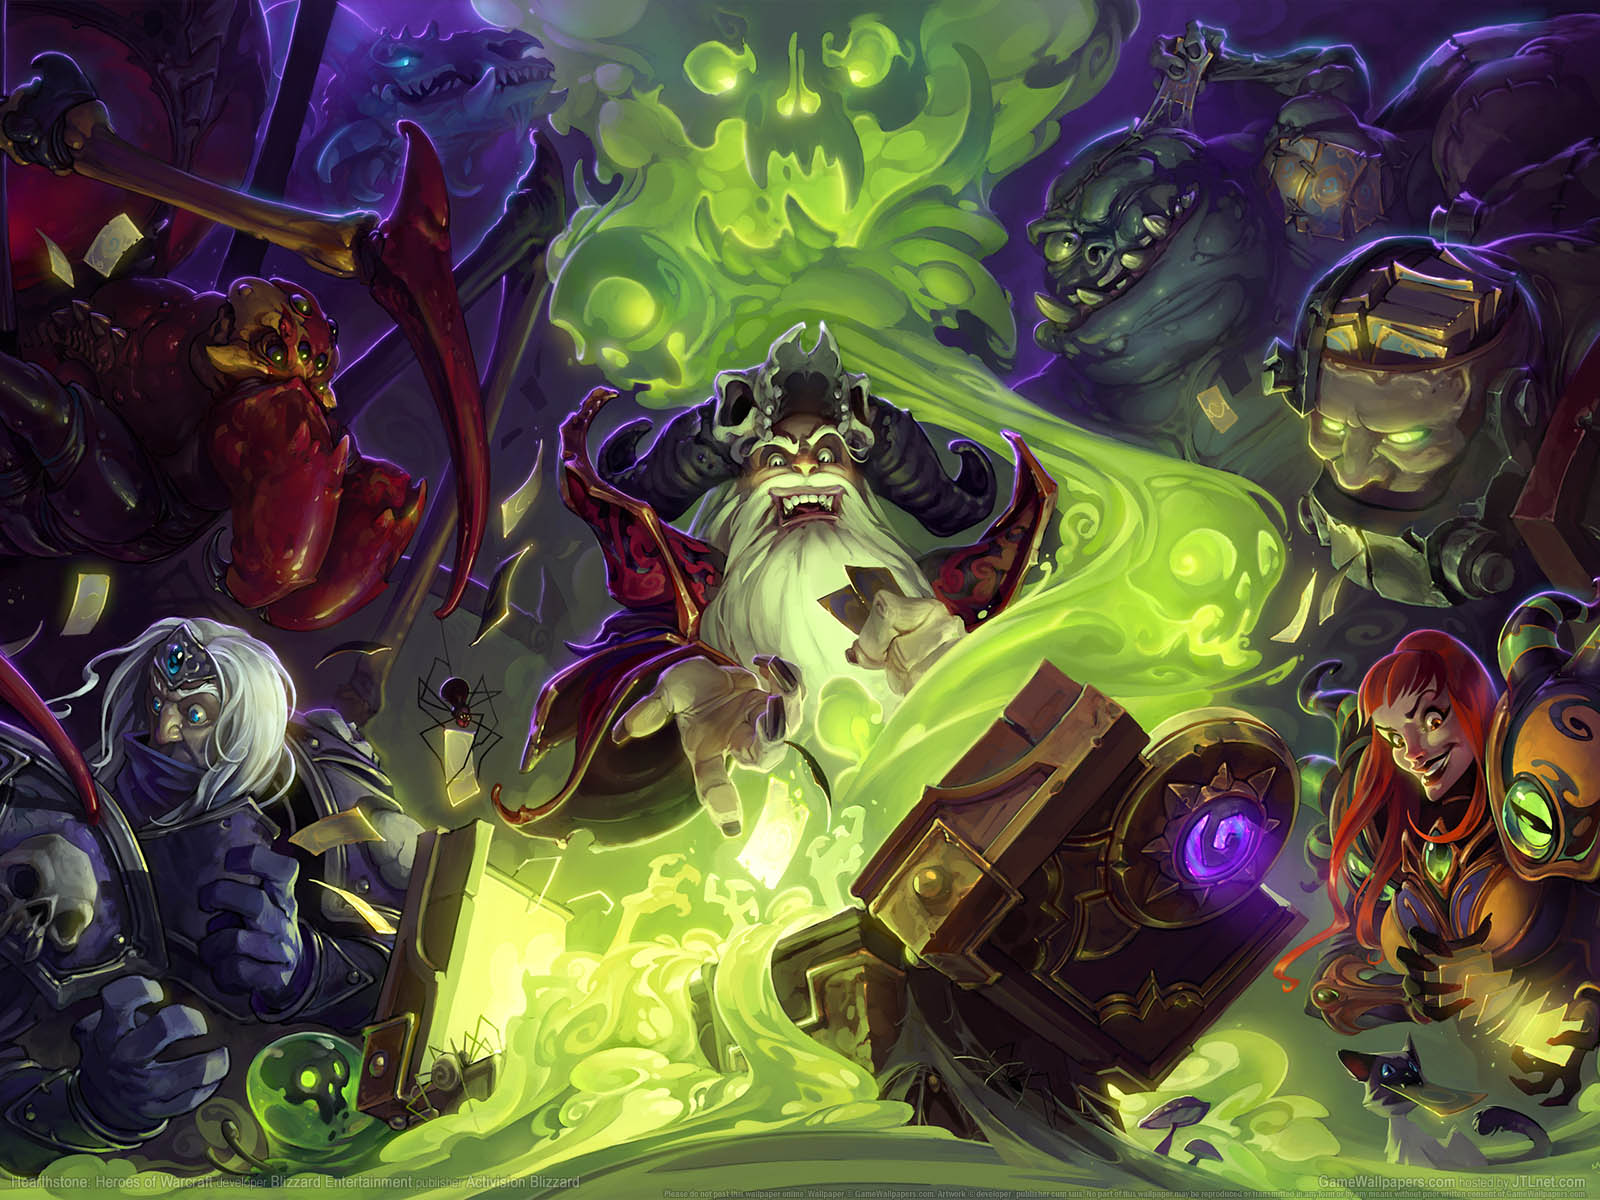 Hearthstone%253A Heroes of Warcraft wallpaper 08 1600x1200